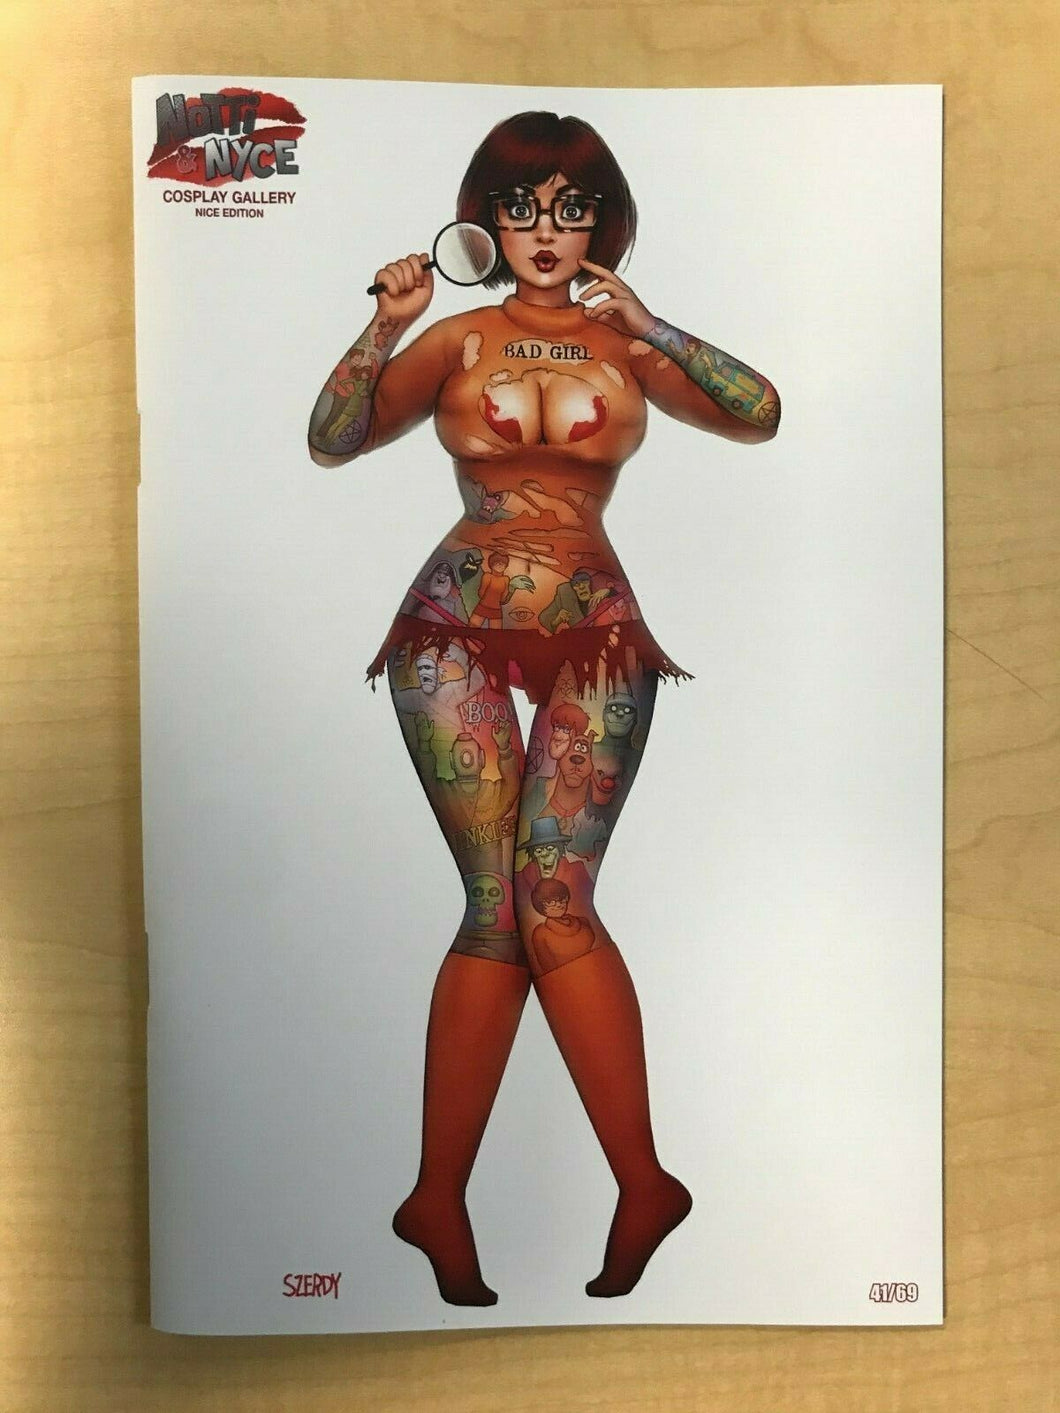 Notti & Nyce Cosplay Gallery VELMA Nice White Variant Cover by Nate Szerdy /69